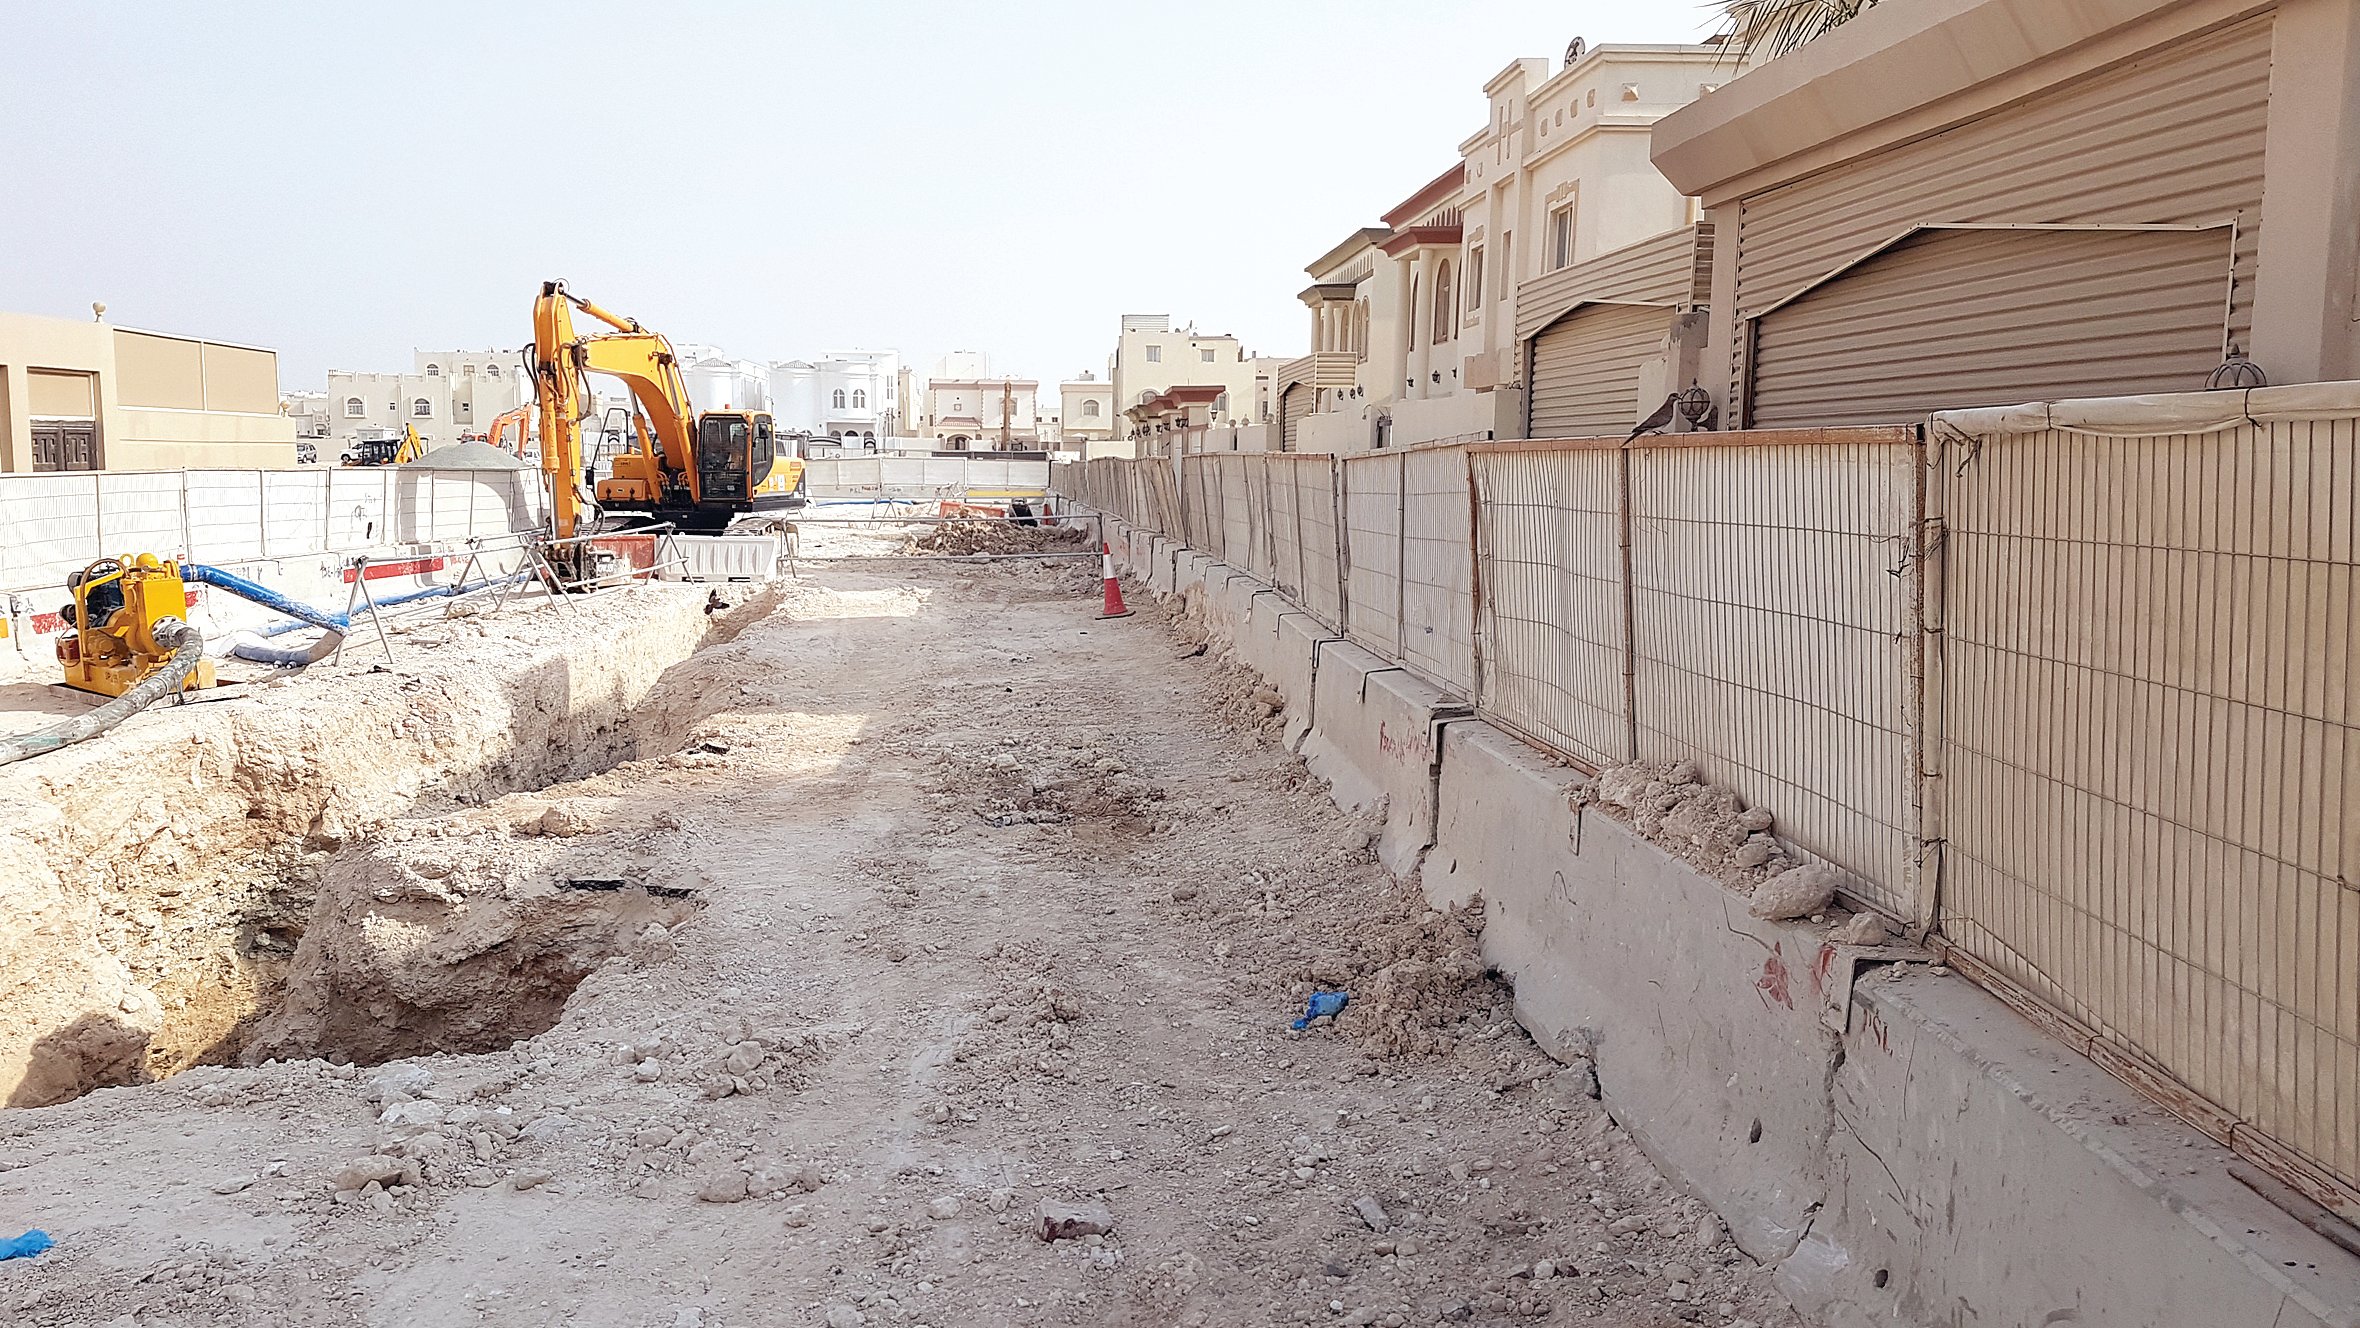 Infrastructure works are disturbing the residents of Al Meshaf streets